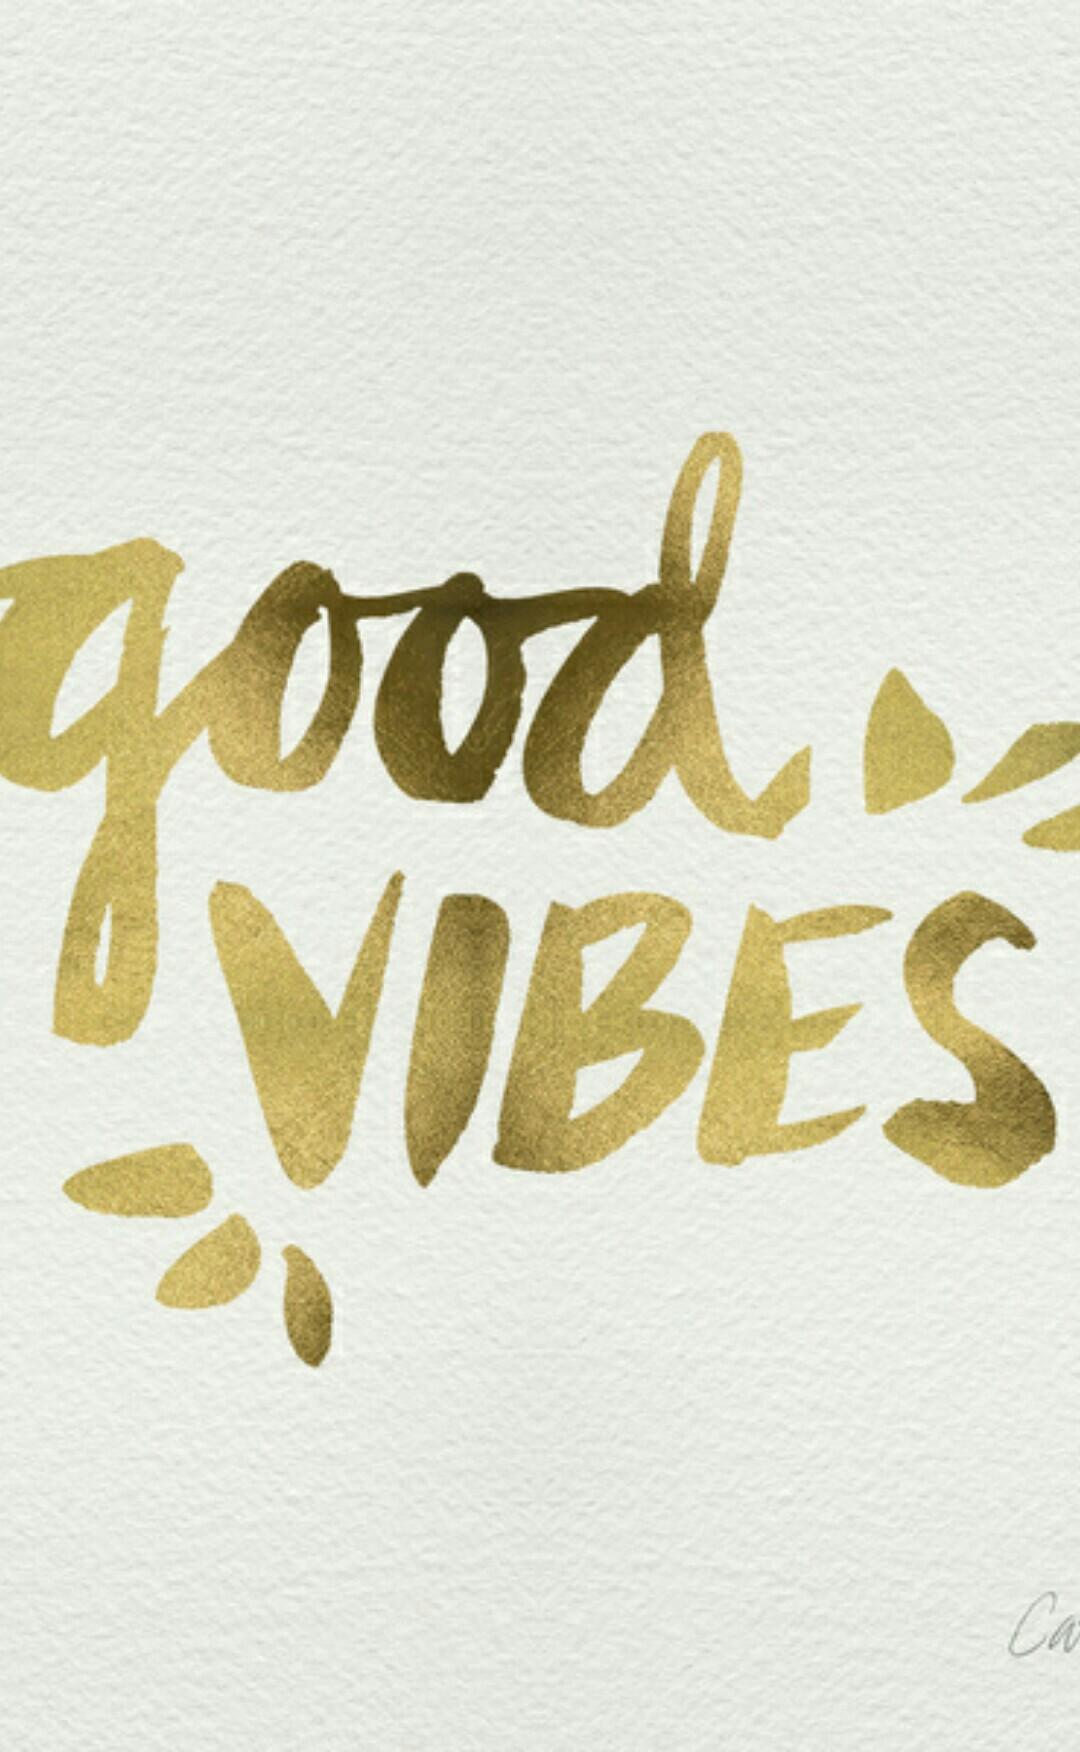 Good vibes only peeps